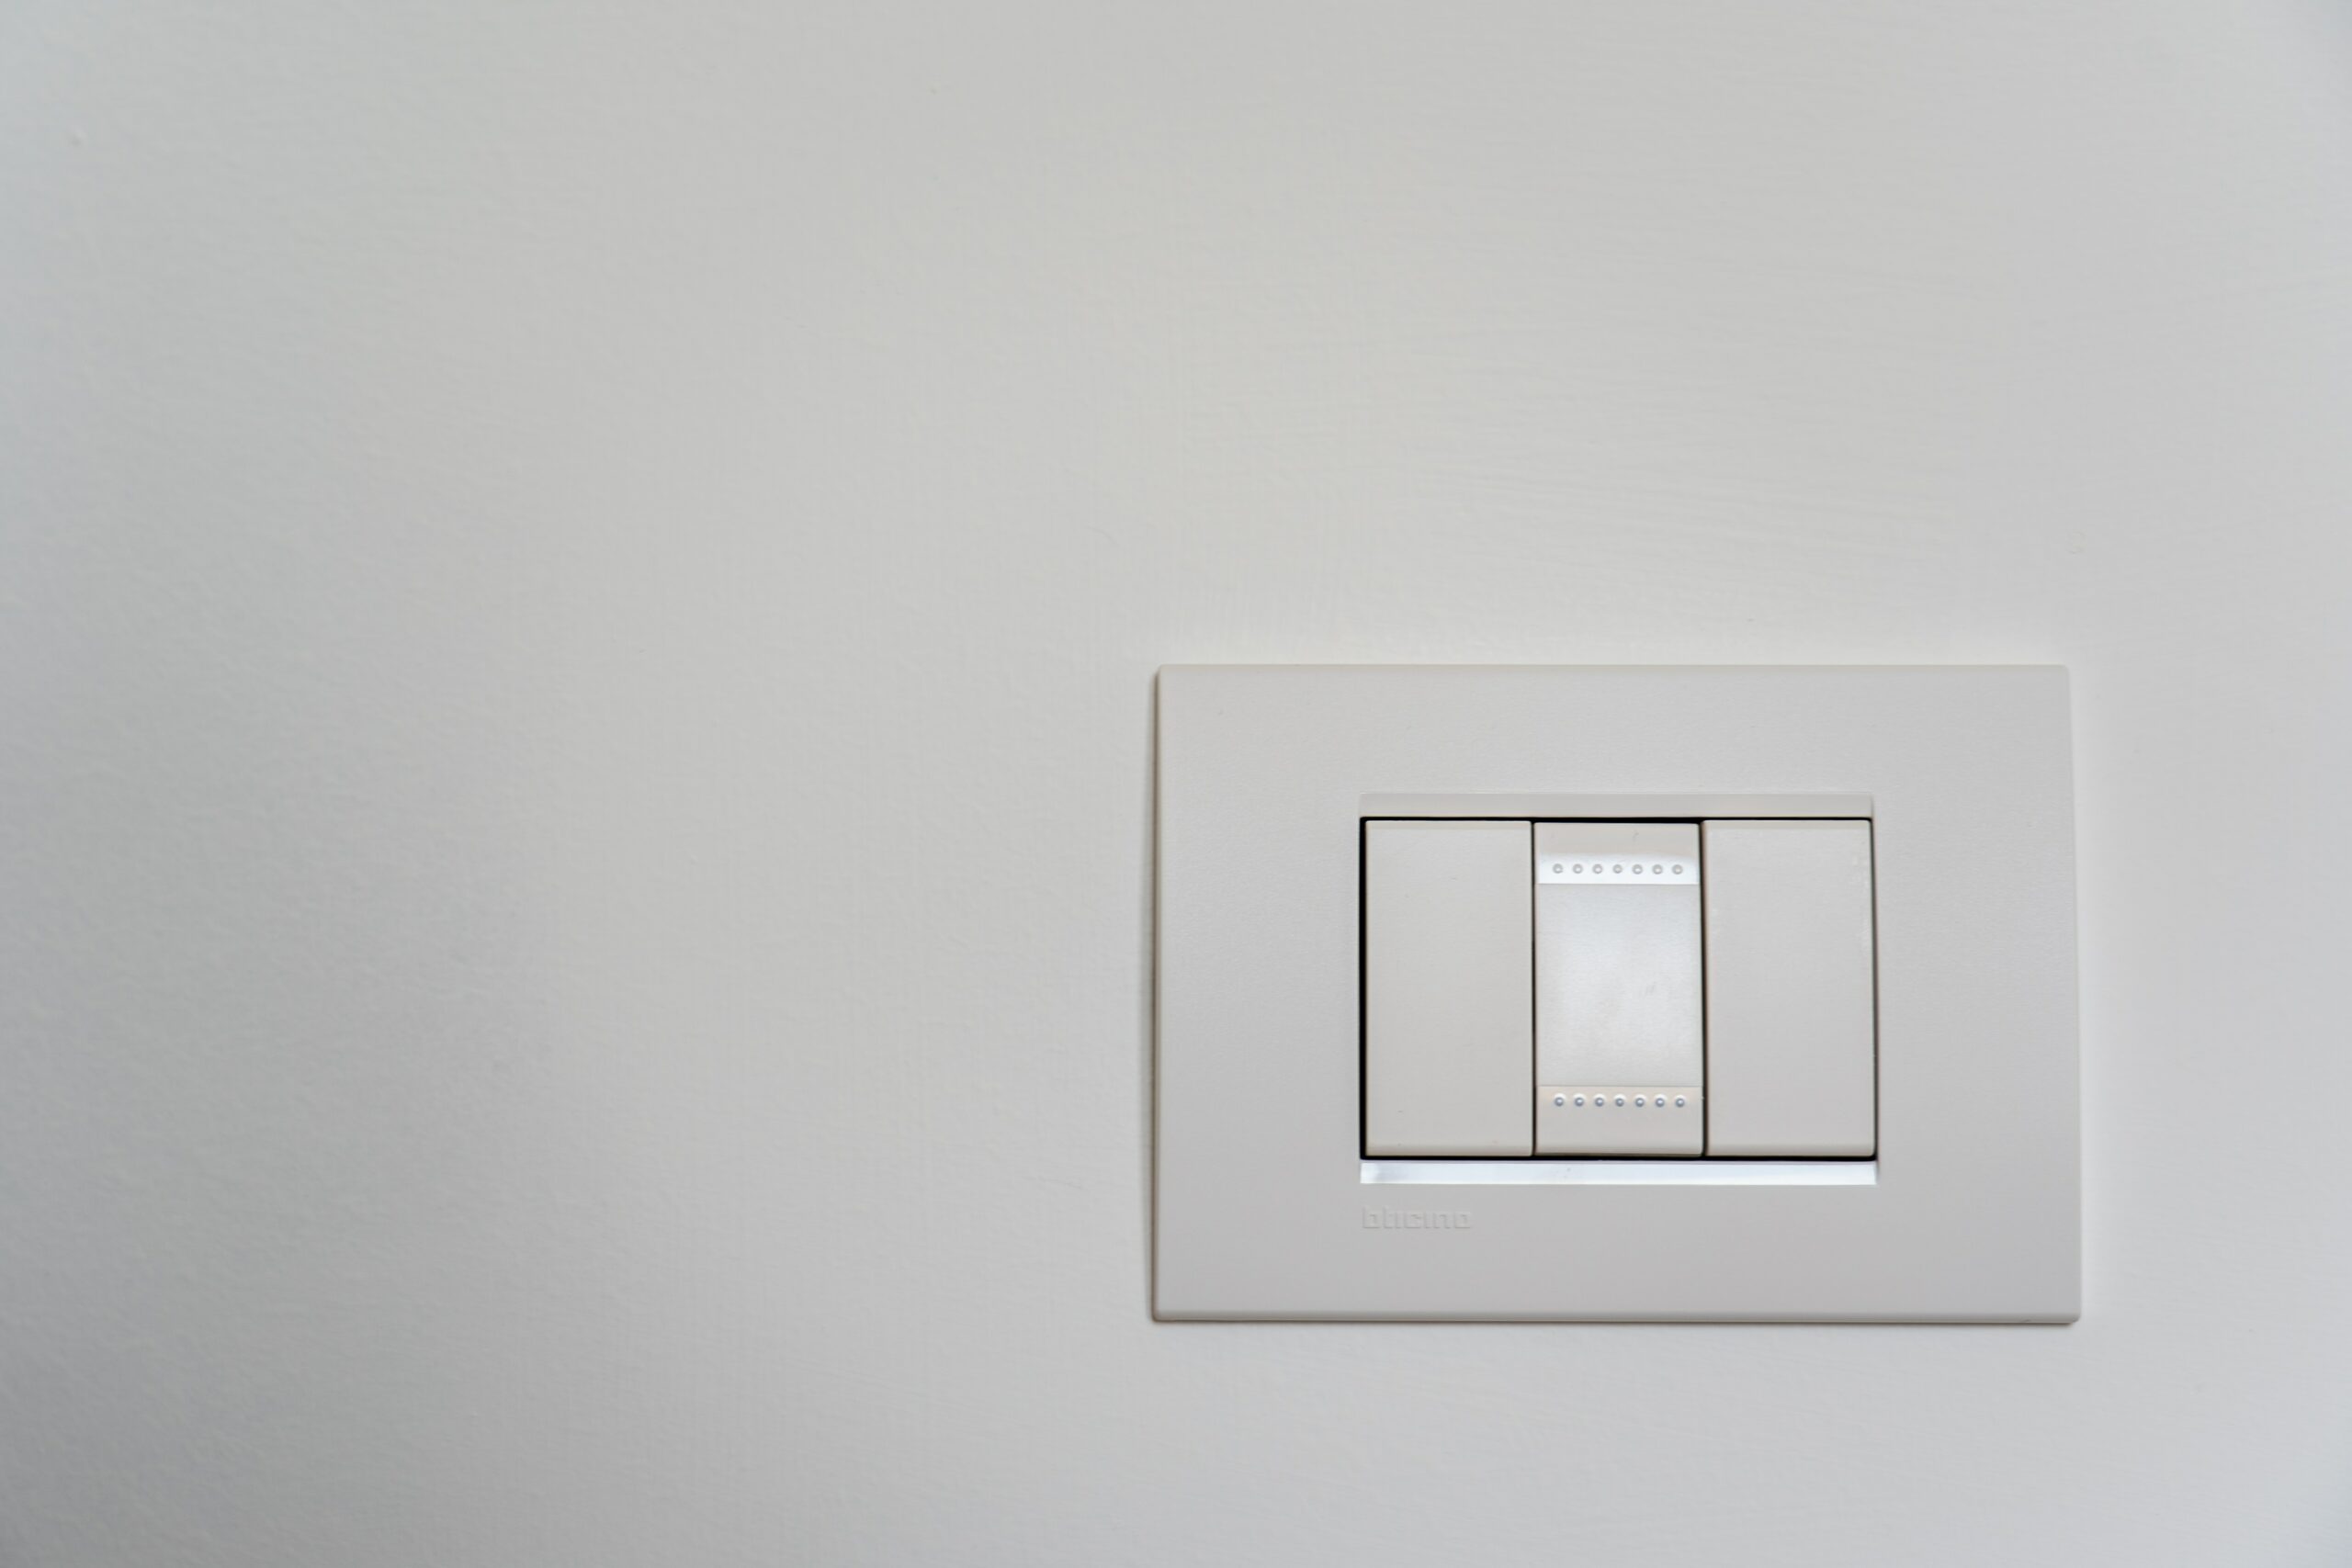 Key Points to Consider When Installing Dimmer Switches